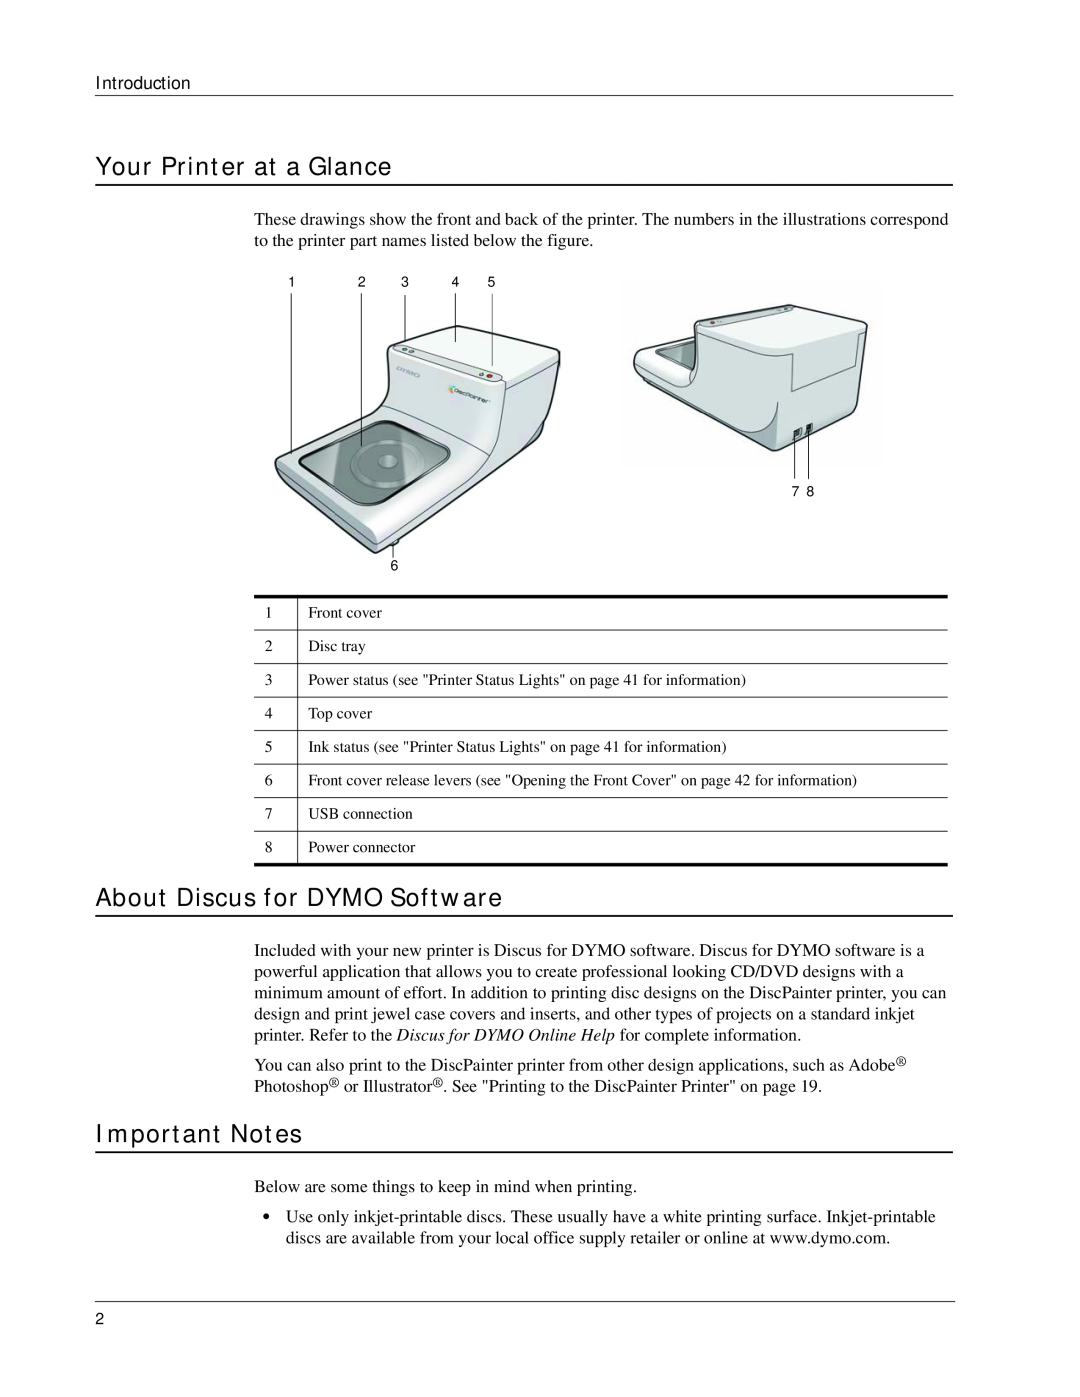 Dymo DiscPainter manual Your Printer at a Glance, About Discus for DYMO Software, Important Notes 